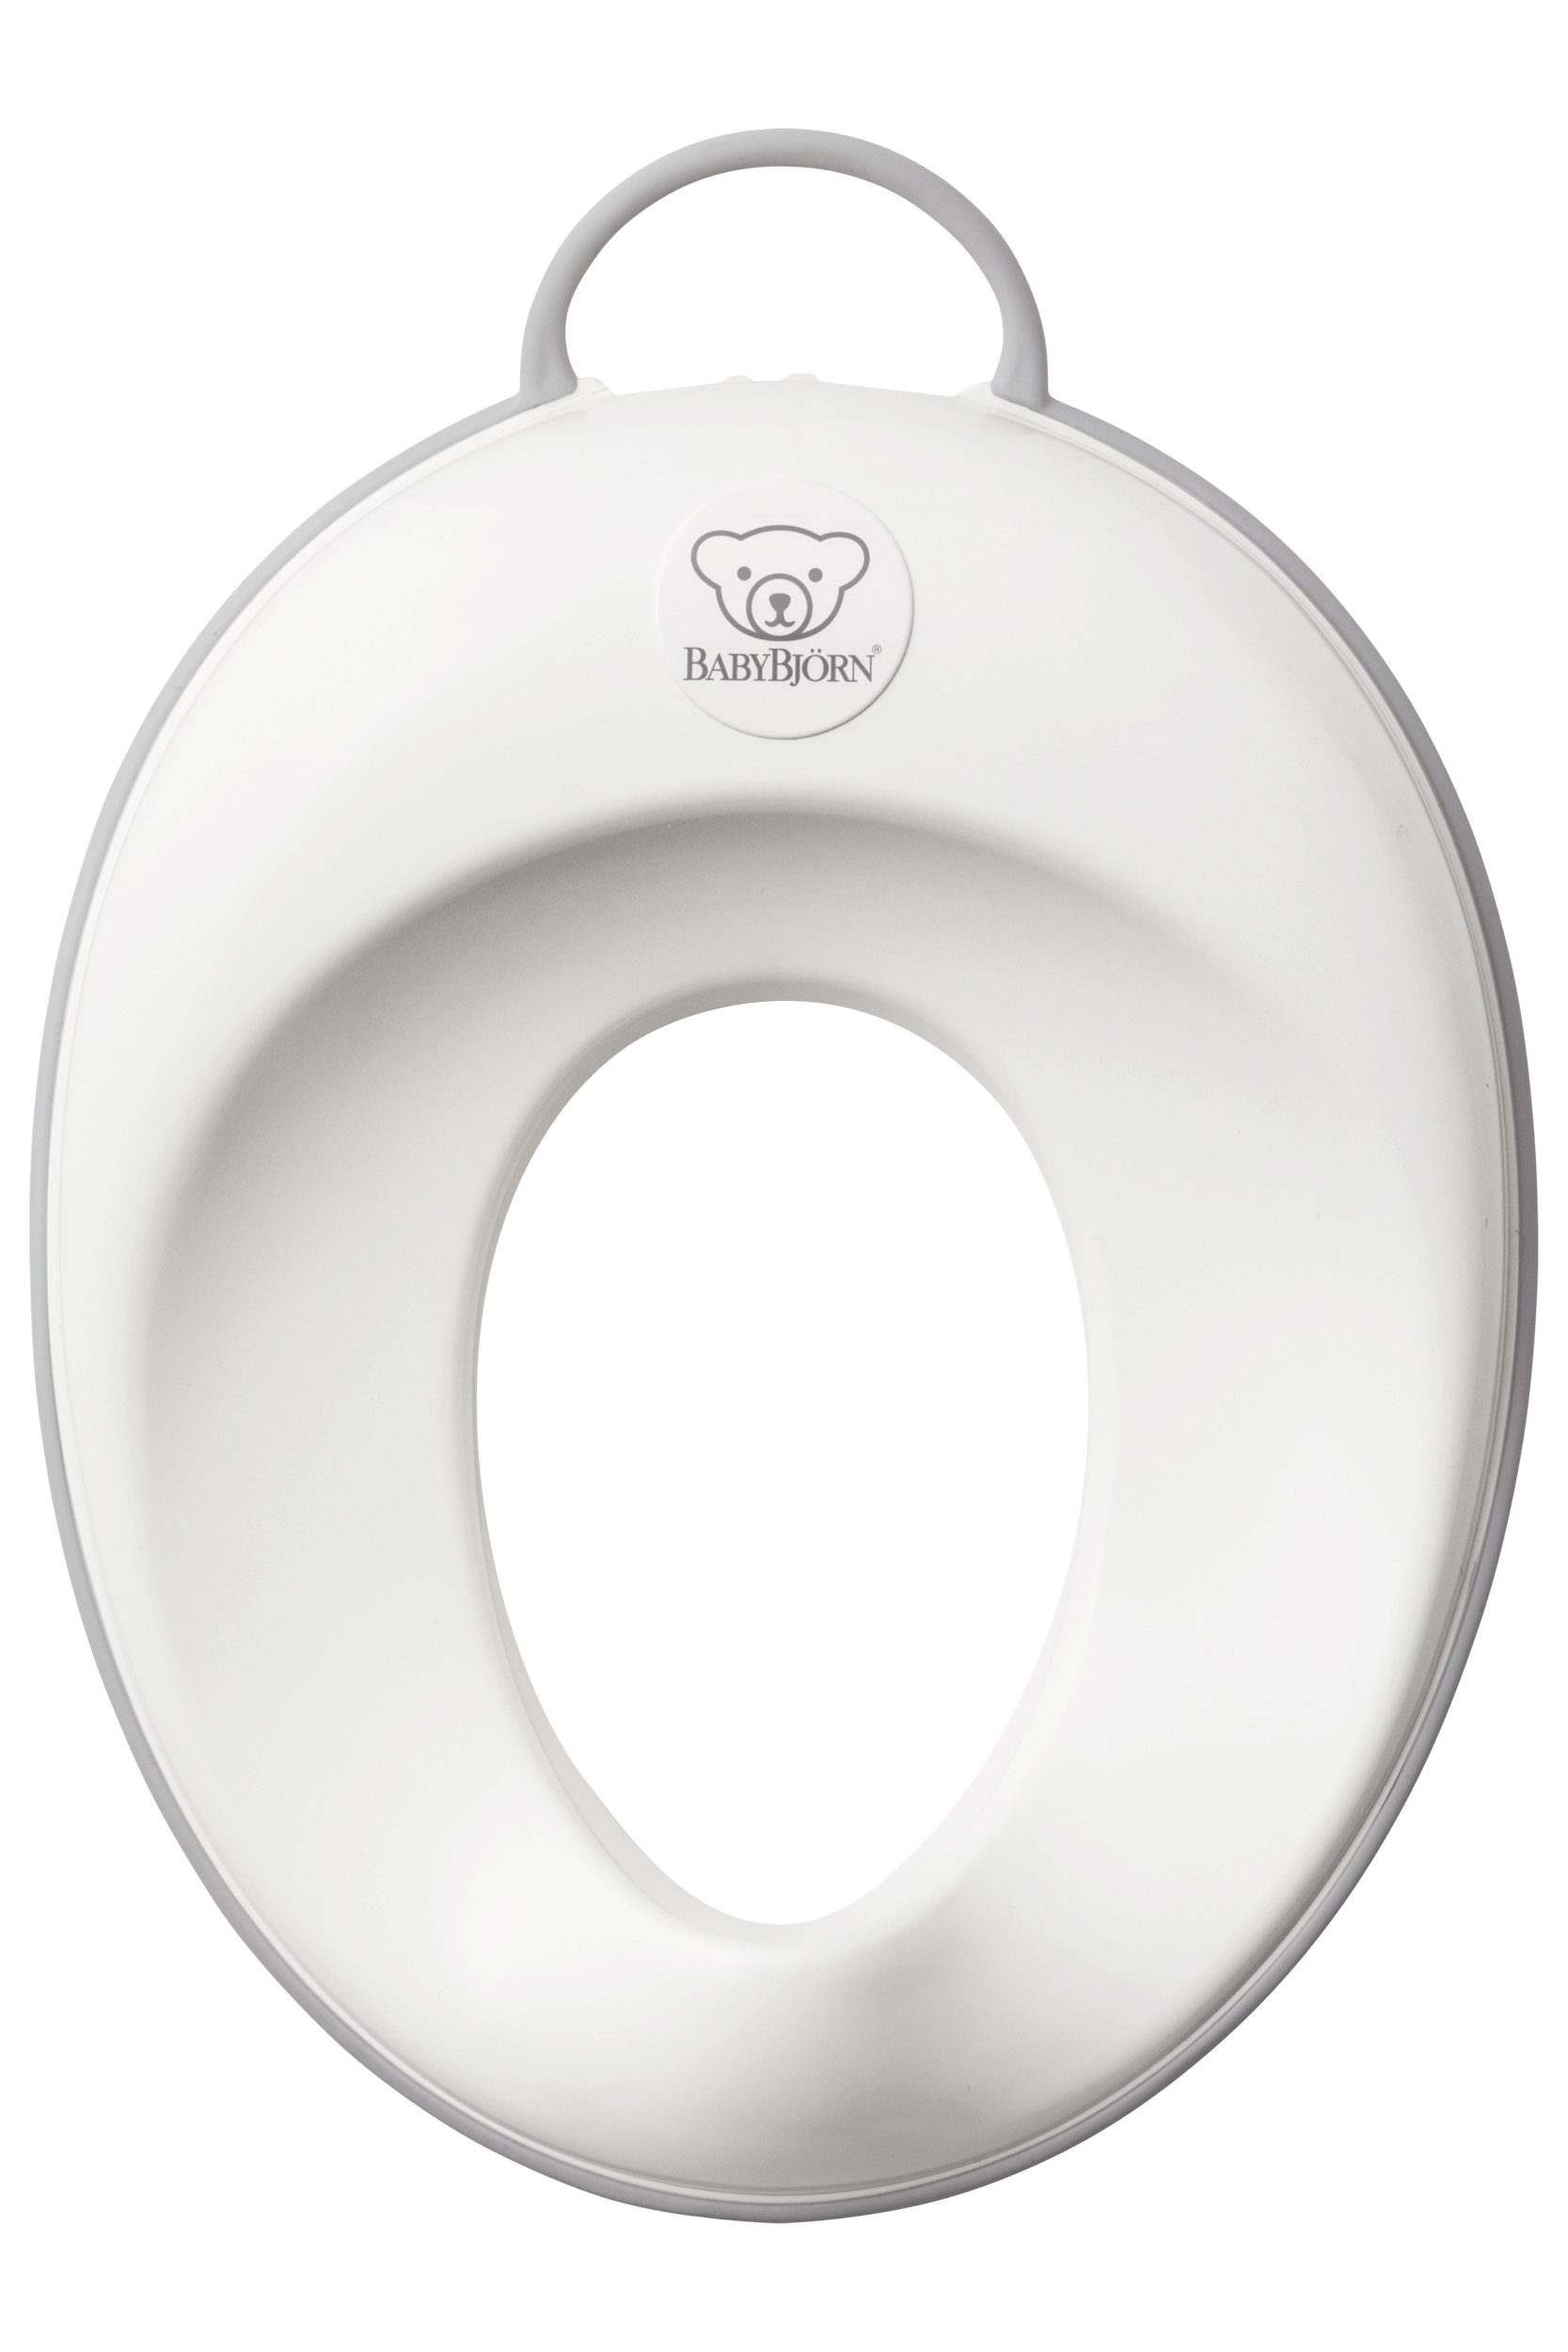 baby bjorn toilet seat reducer Toilet trainer babybjorn seat trainers seats adapter